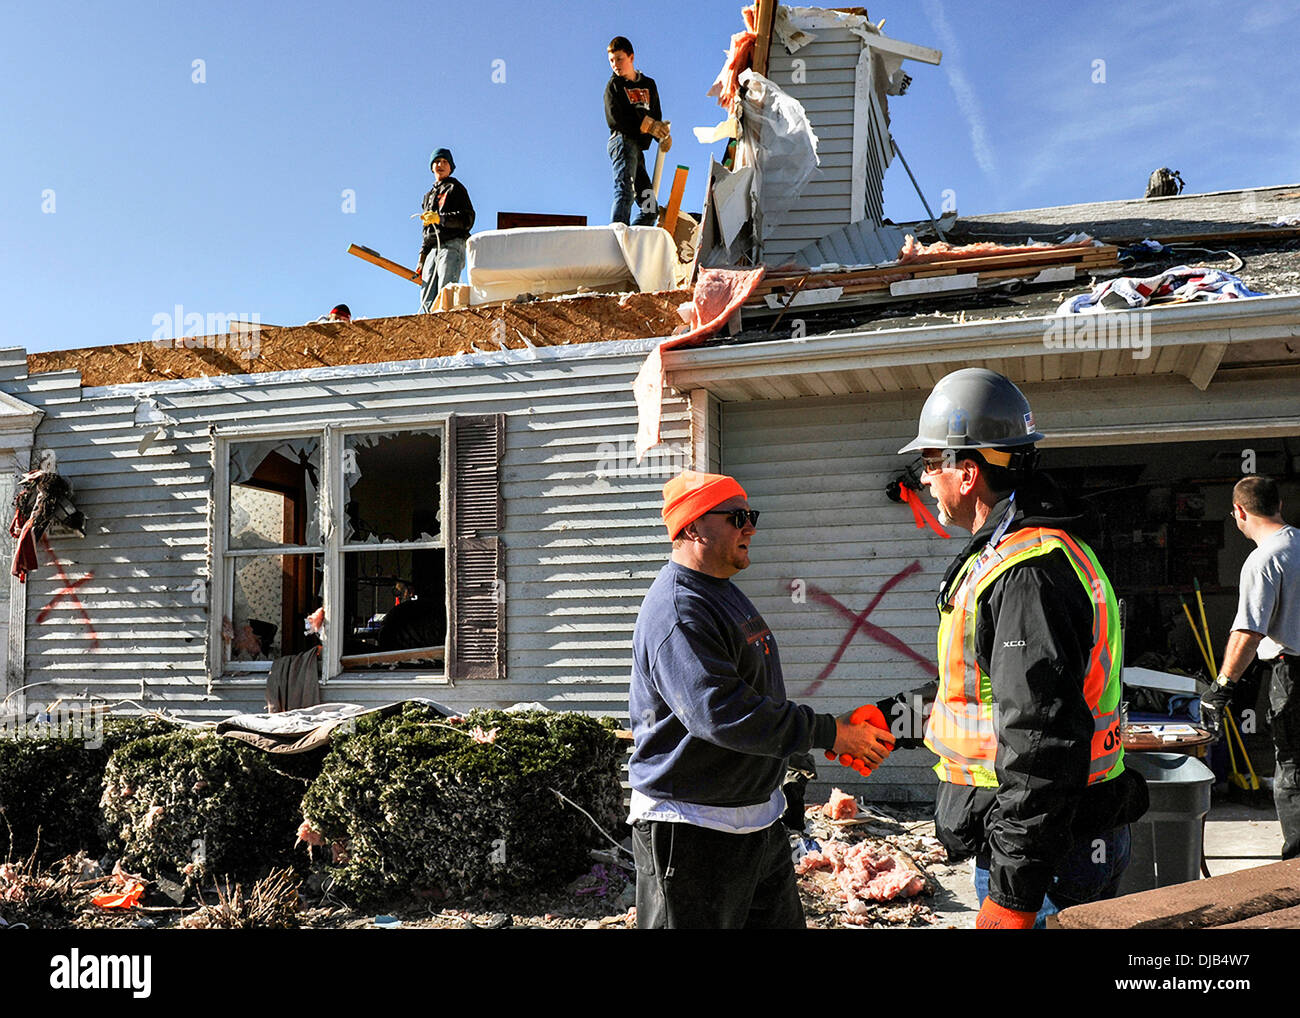 Residents begin demolishing what is left of their home destroyed by an EF-4 tornado November 19, 2013 in Washington, IL. The tornado left a path of destruction that stretched for more than 46 miles and damaged fourteen-hundred homes. Stock Photo